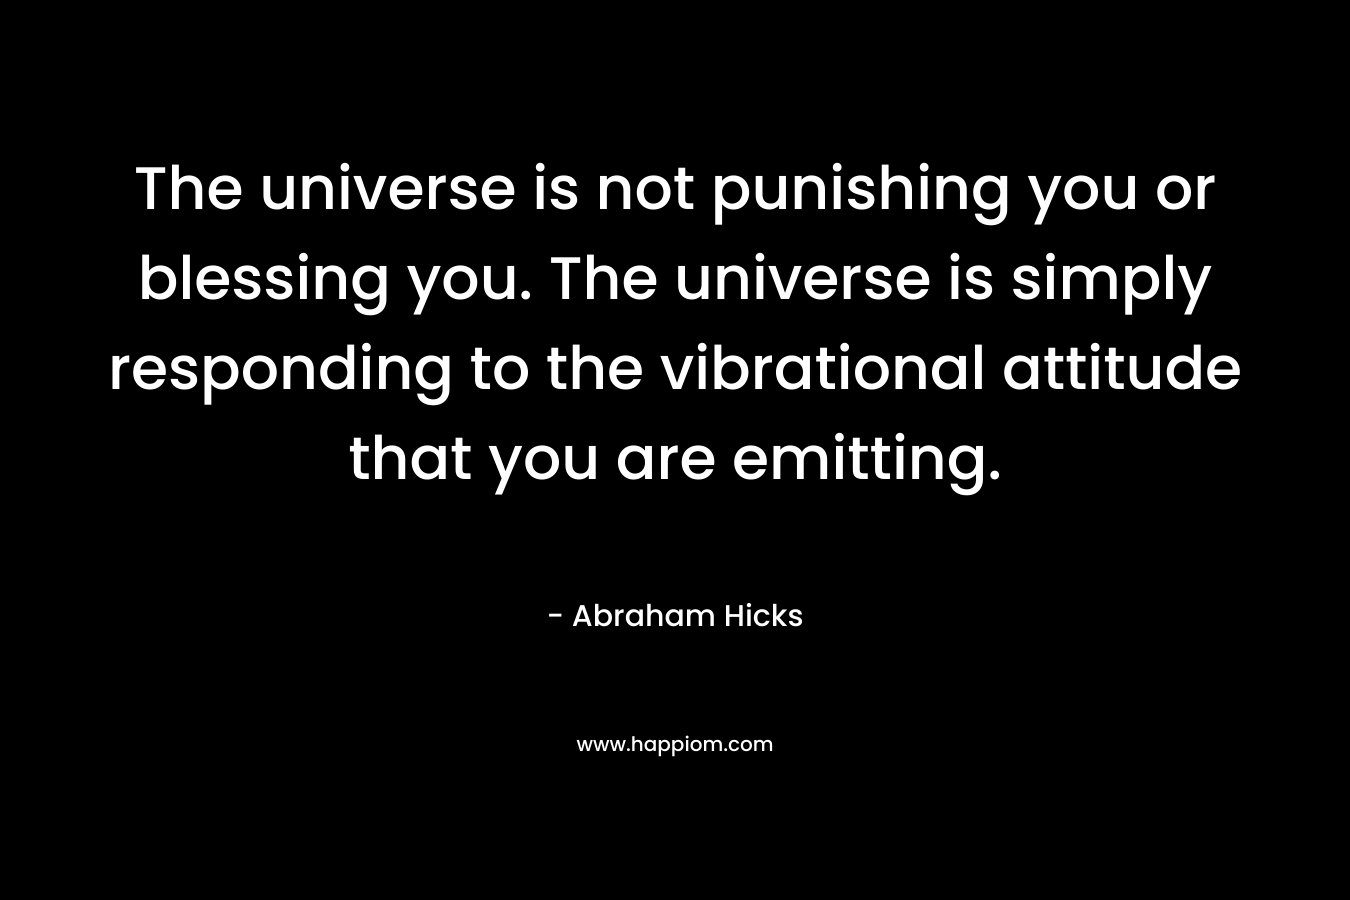 The universe is not punishing you or blessing you. The universe is simply responding to the vibrational attitude that you are emitting. – Abraham Hicks